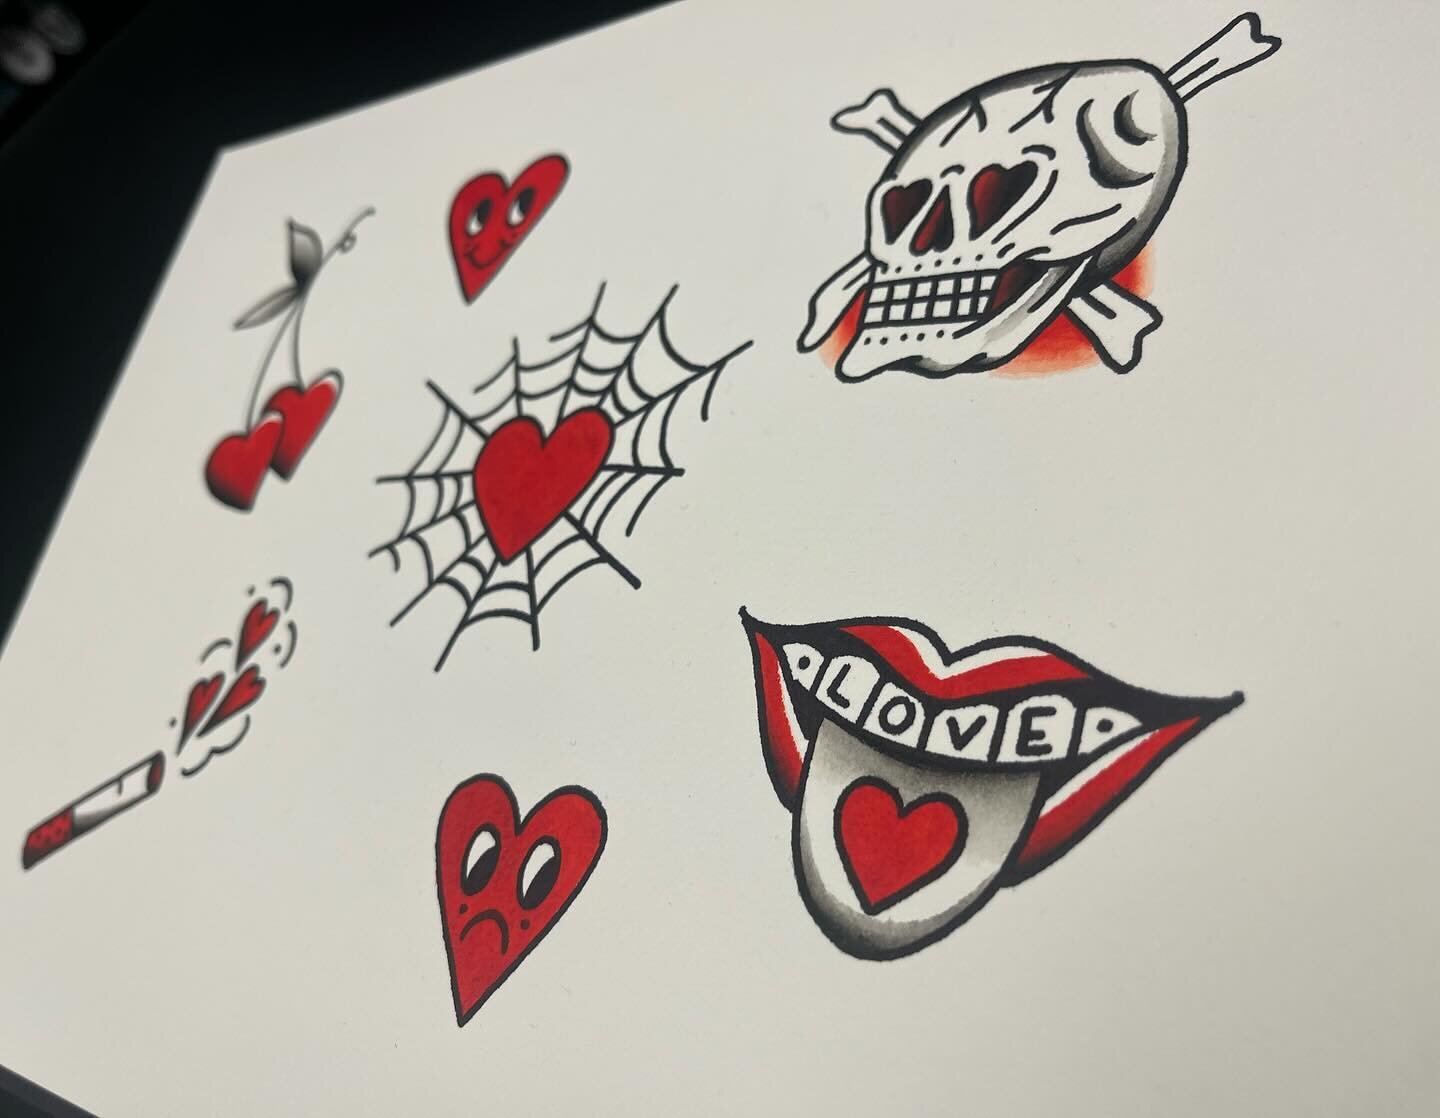 last sneaky peaky ! design offerings from: @carbellatattoo for our vday flash event TOMORROW!! event info below ⬇️⬇️⬇️

Around noon I will be going out to the line to get down everyone&rsquo;s name and design choice. You have to physically come to th